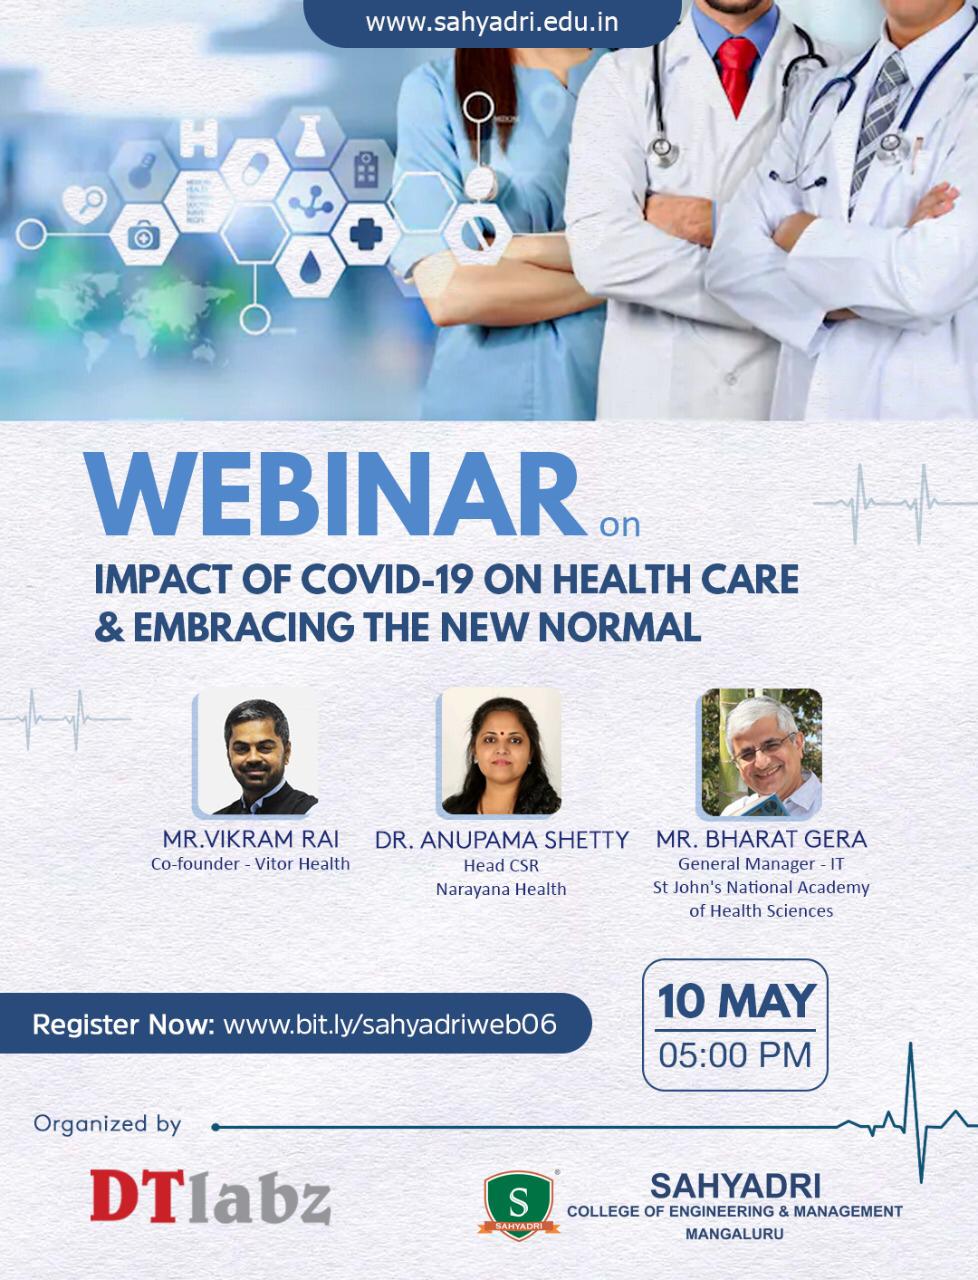 Webinar on IMPACT OF COVID-19 ON HEALTH CARE & EMBRACING THE NEW NORMAL